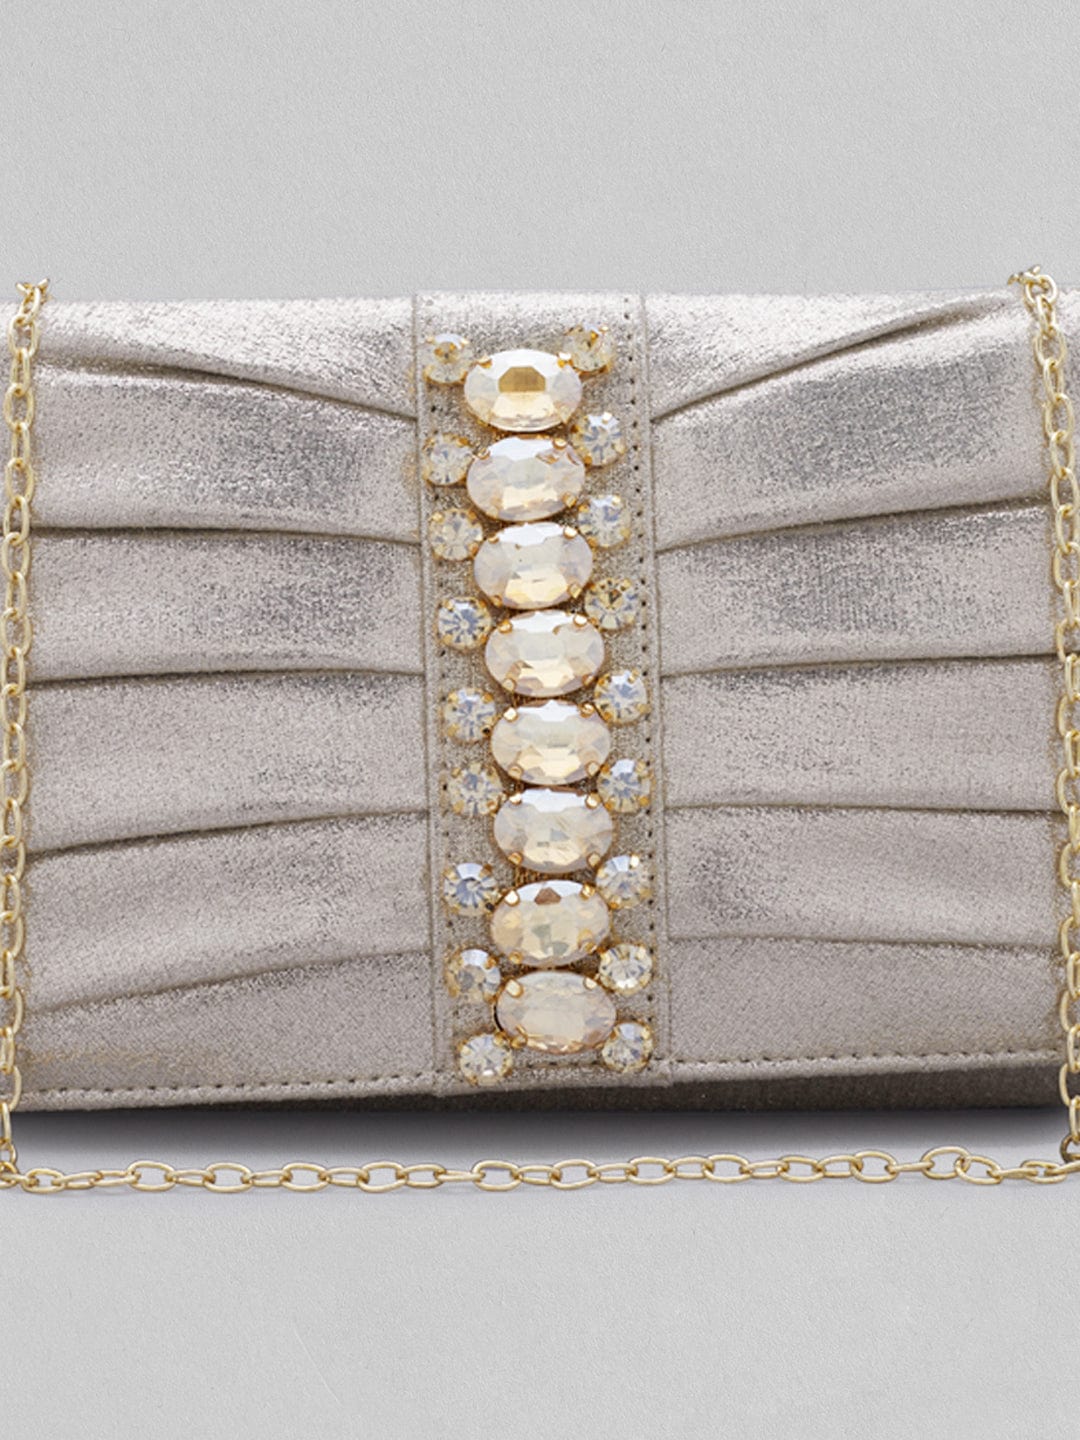 Rubans Silver Coloured Clutch Bag With Studded Stone Design Handbag &amp; Wallet Accessories